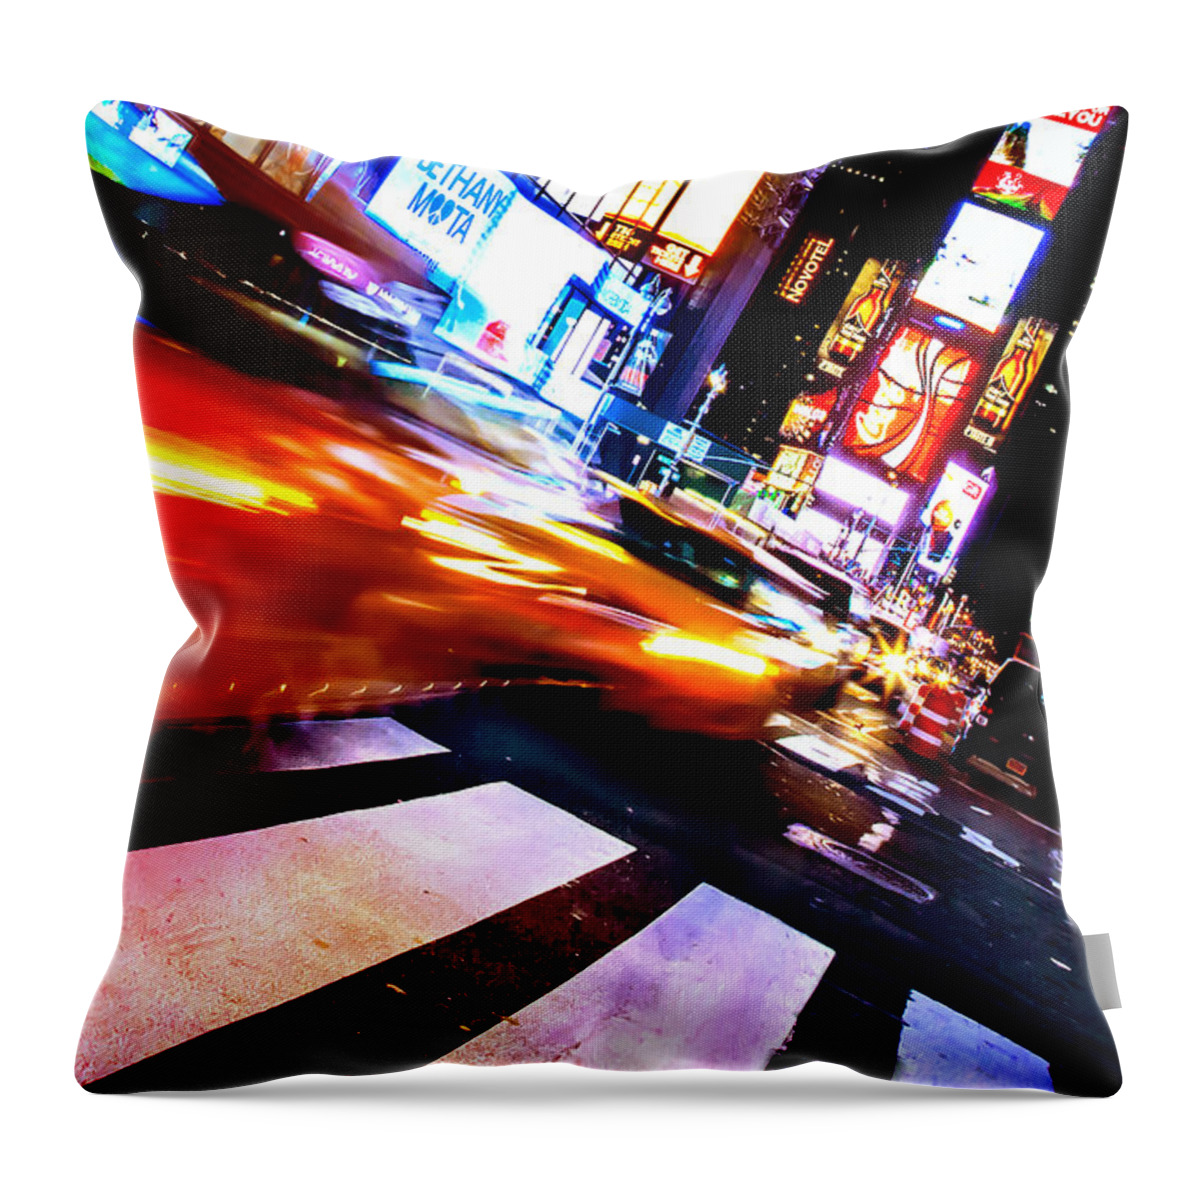 Times Square Throw Pillow featuring the photograph Taxi Square by Az Jackson